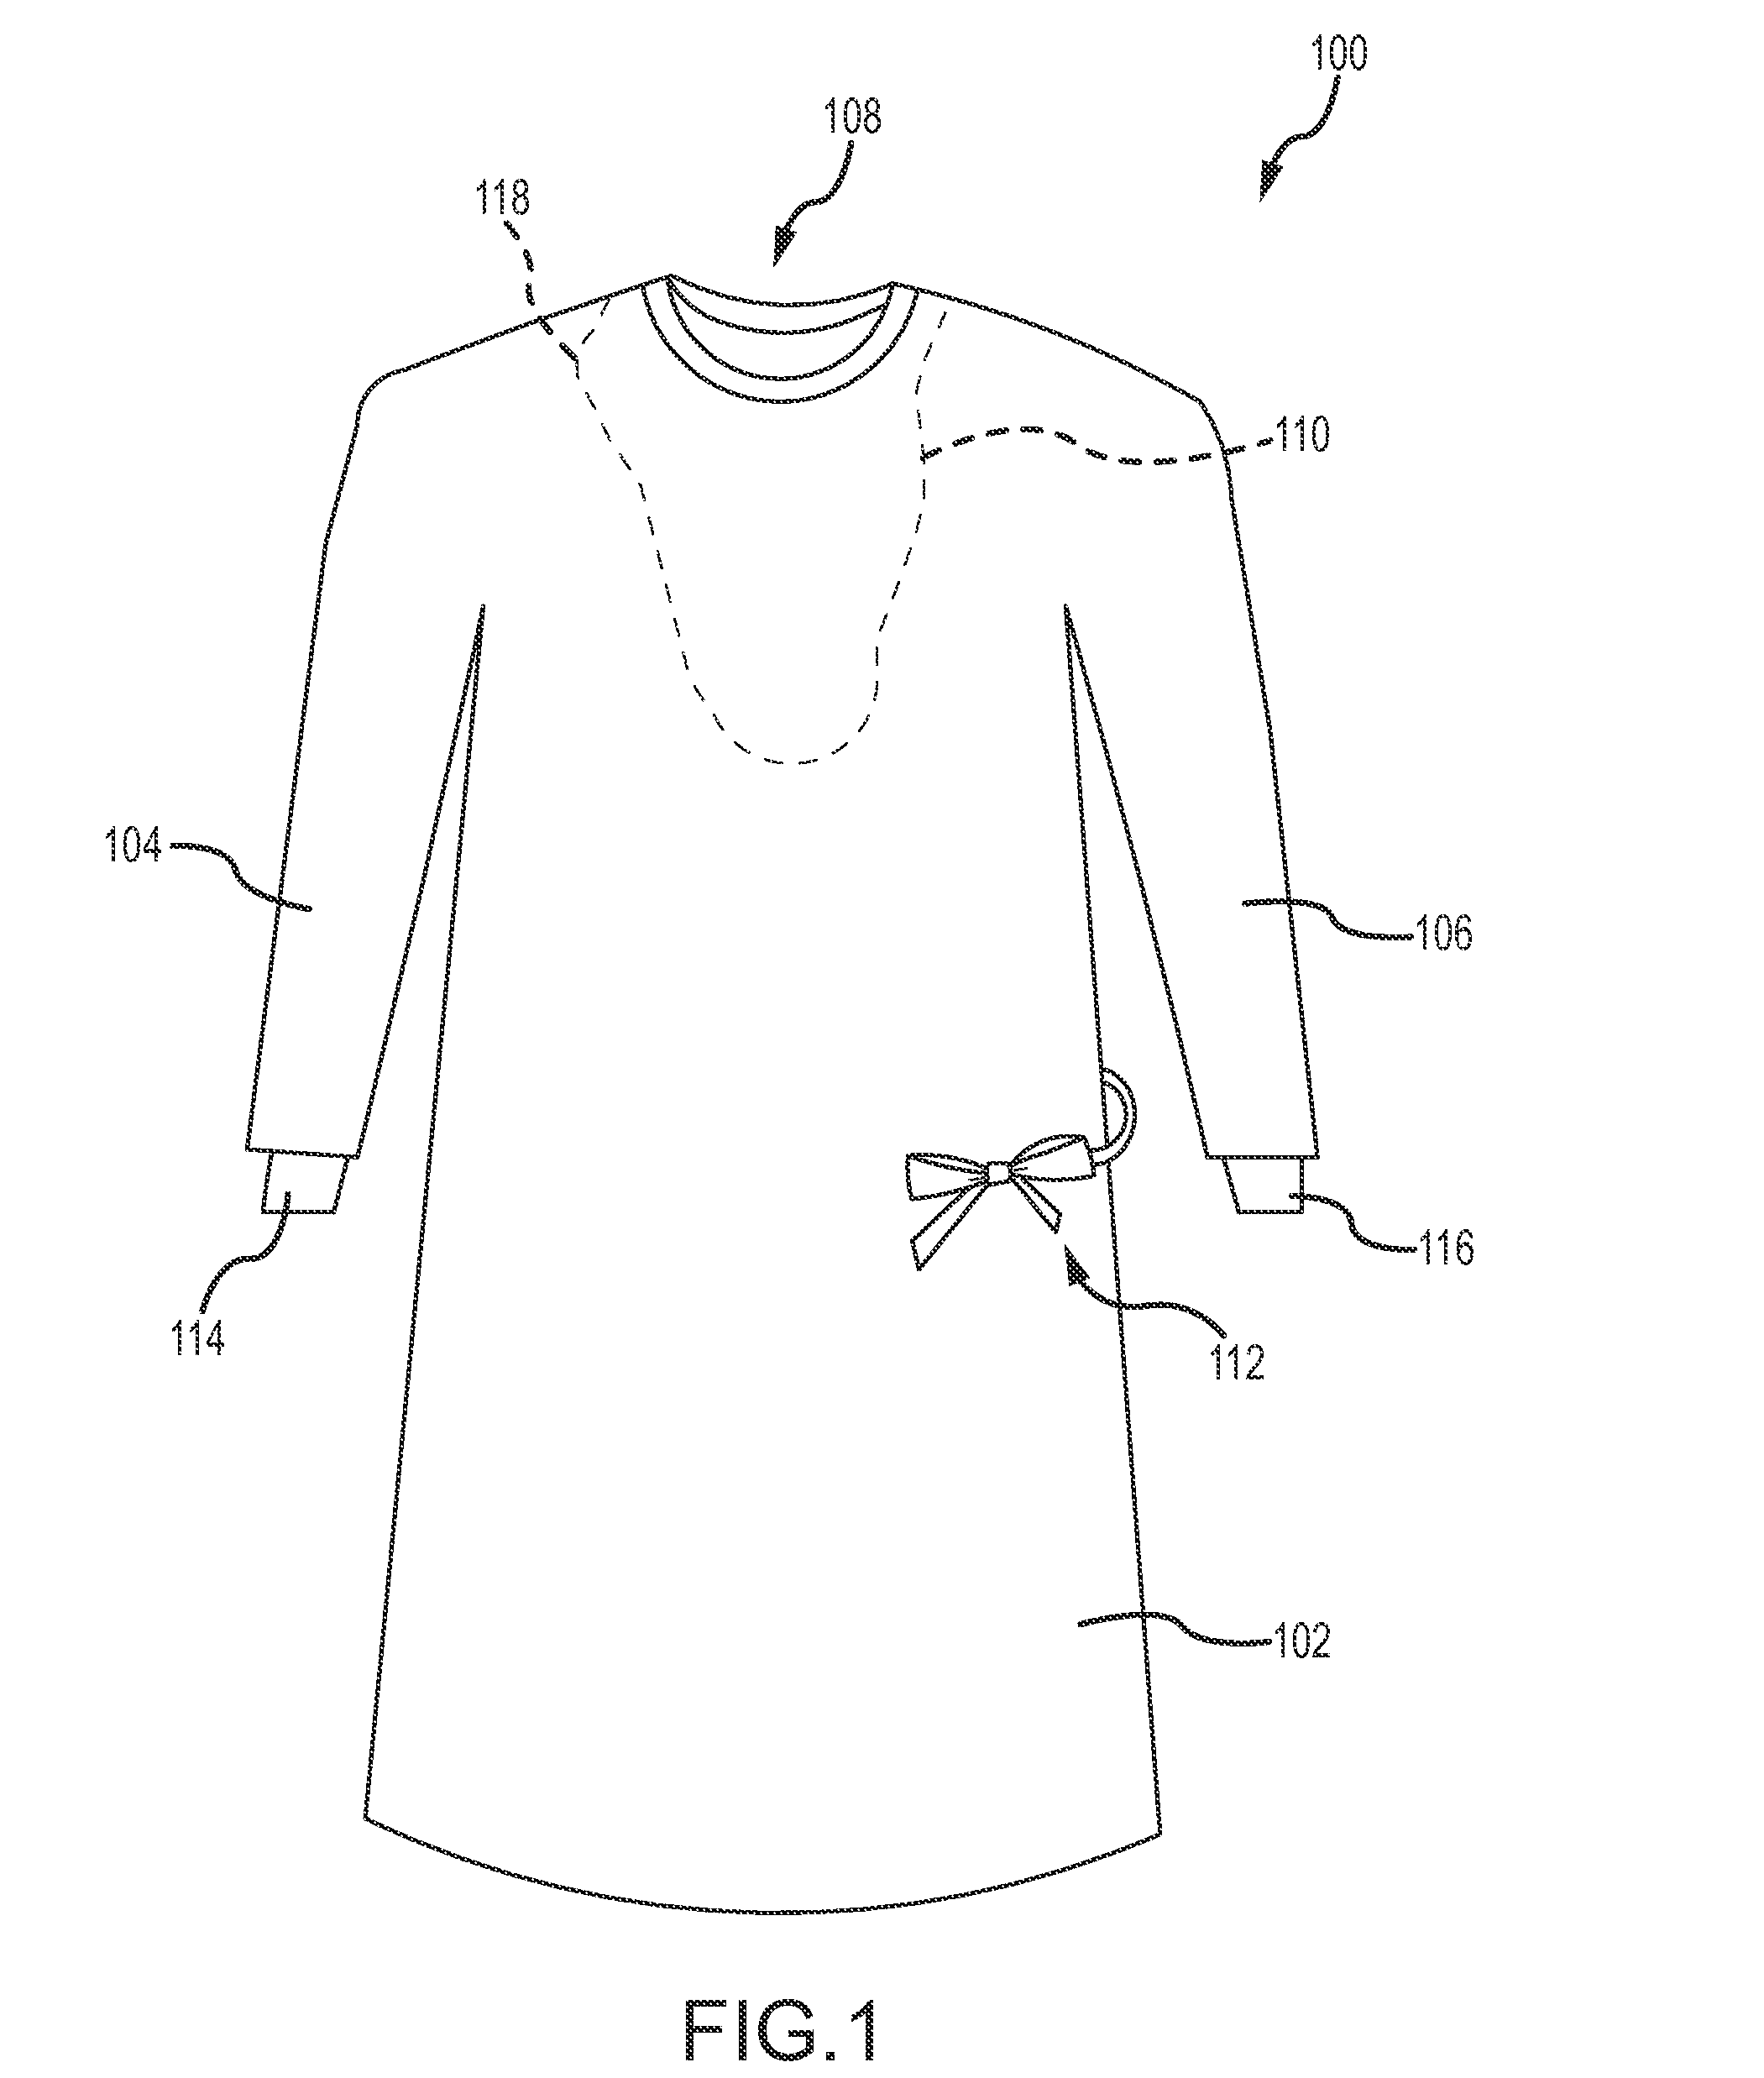 Self-donning surgical gown